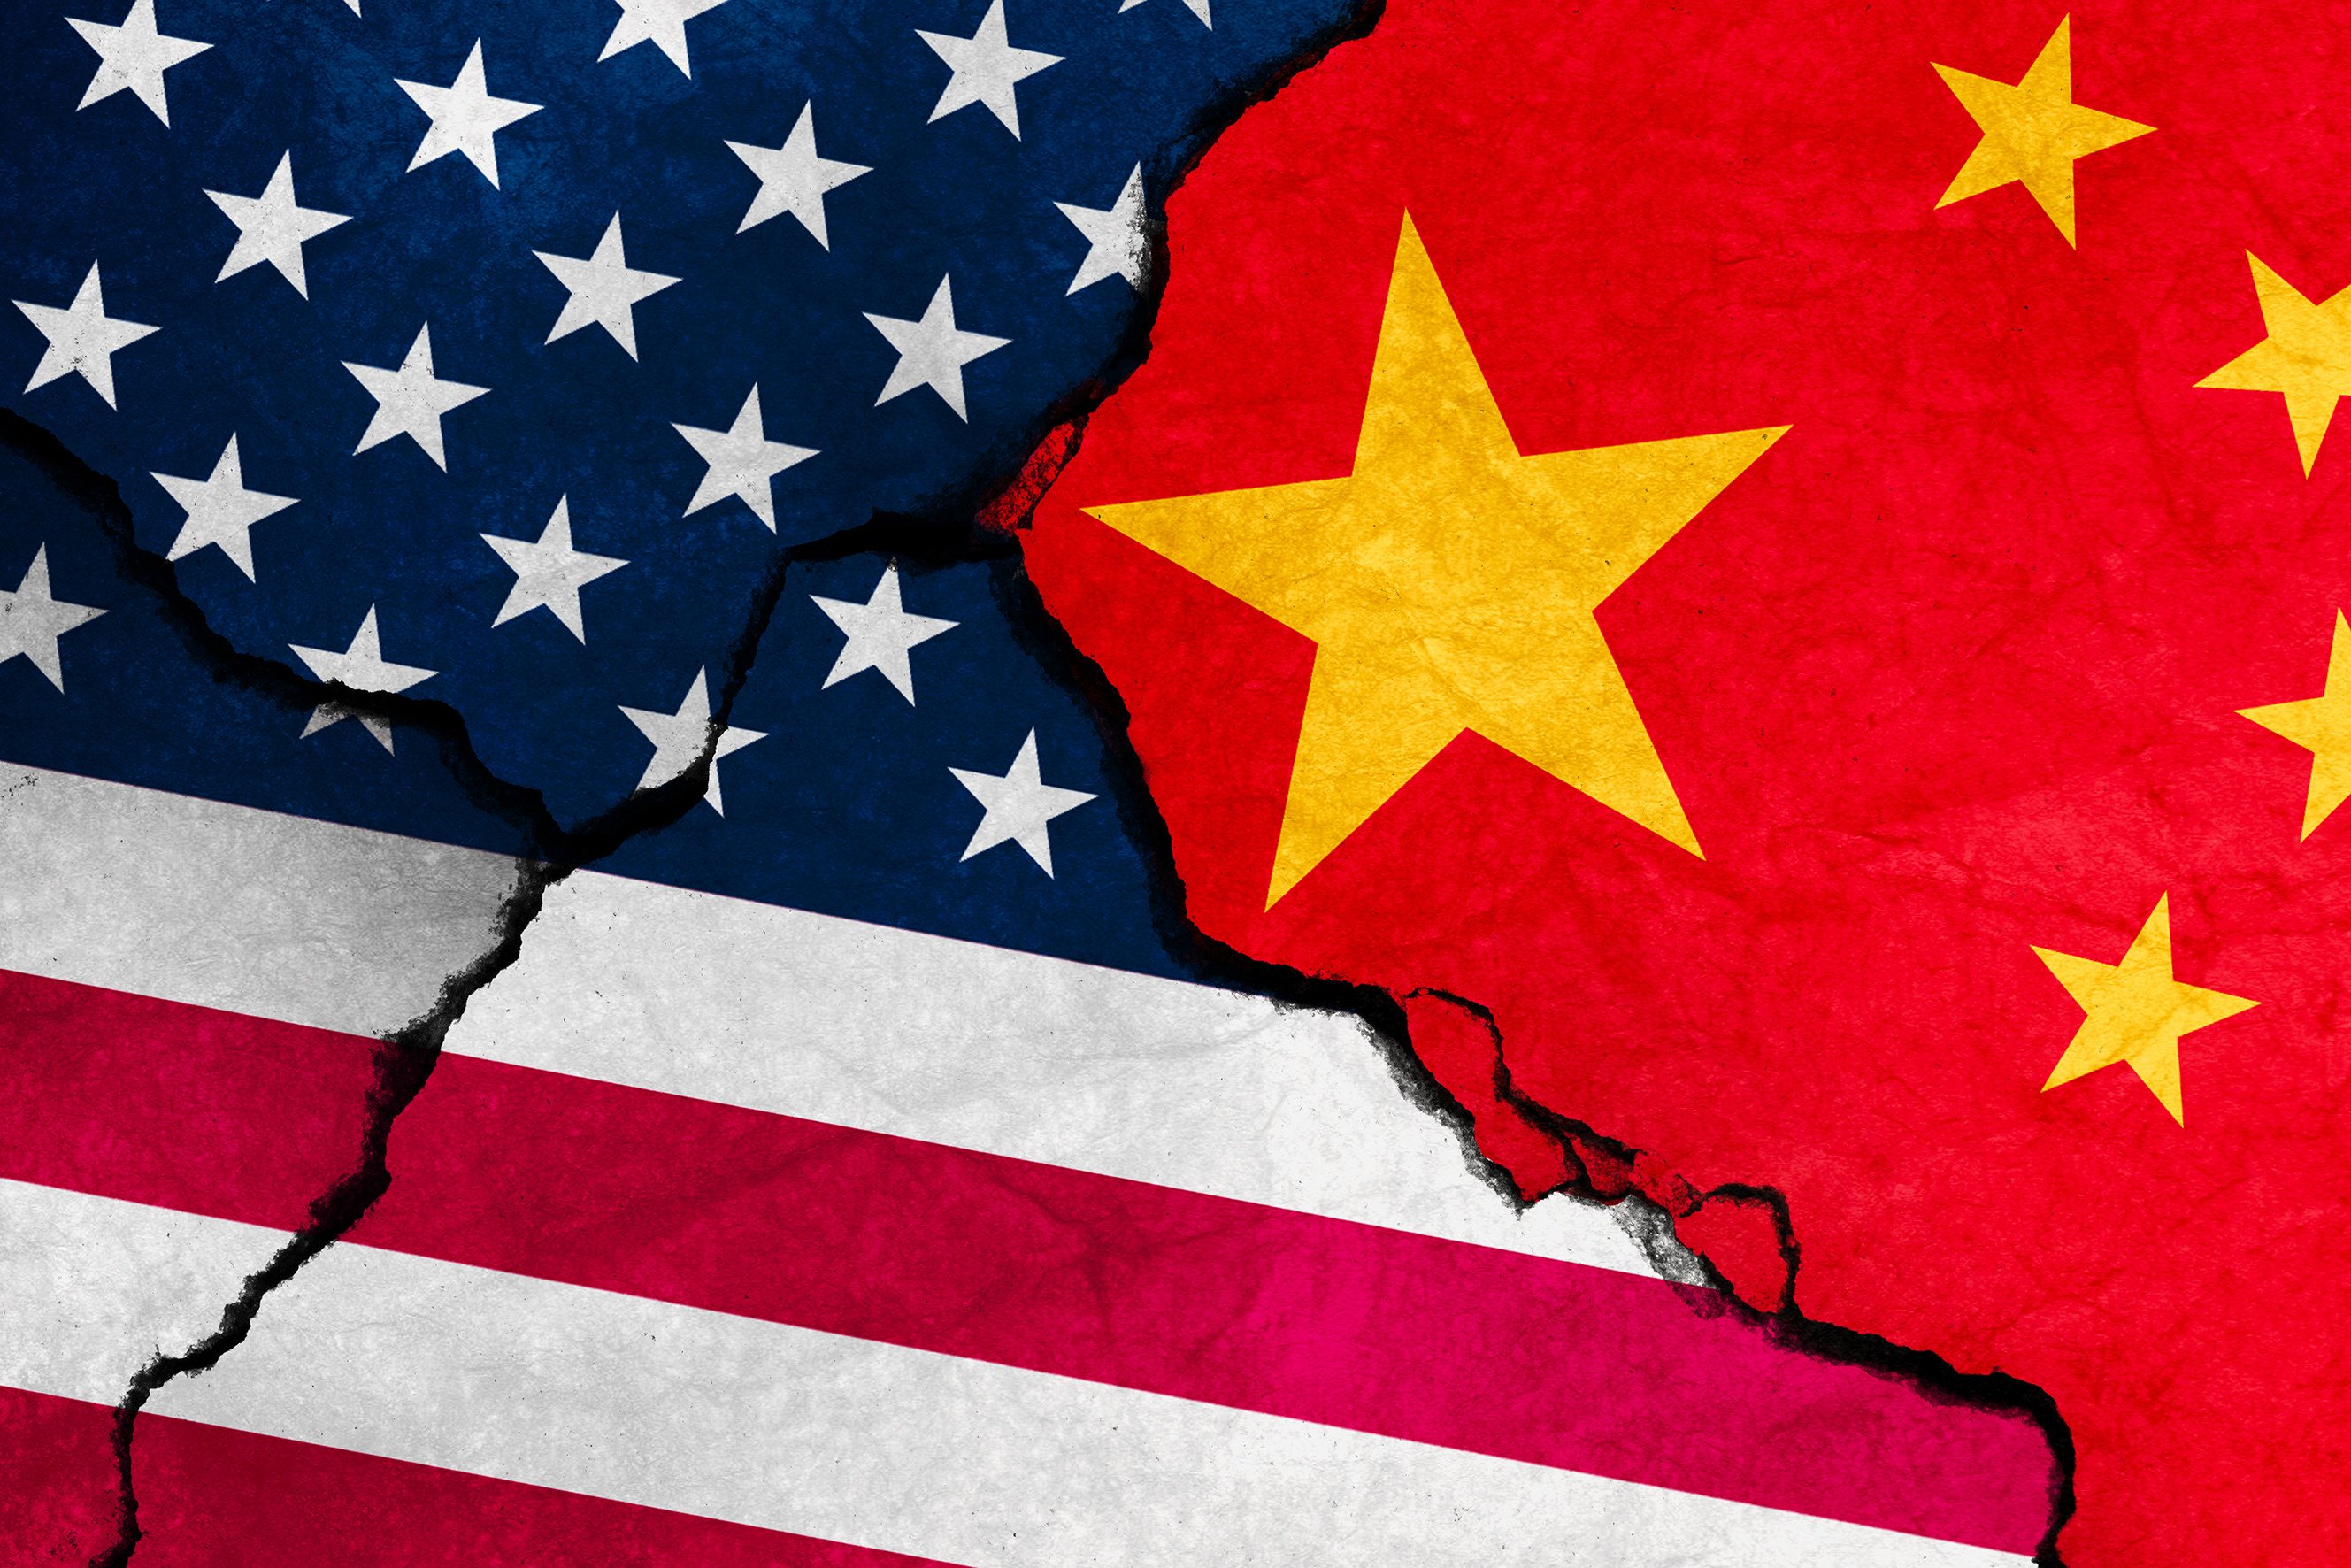 More than 90 per cent of respondents see ‘stalemate in Sino-US bilateral relations political and cultural relations’ as a challenge of doing business in America. Photo: Shutterstock